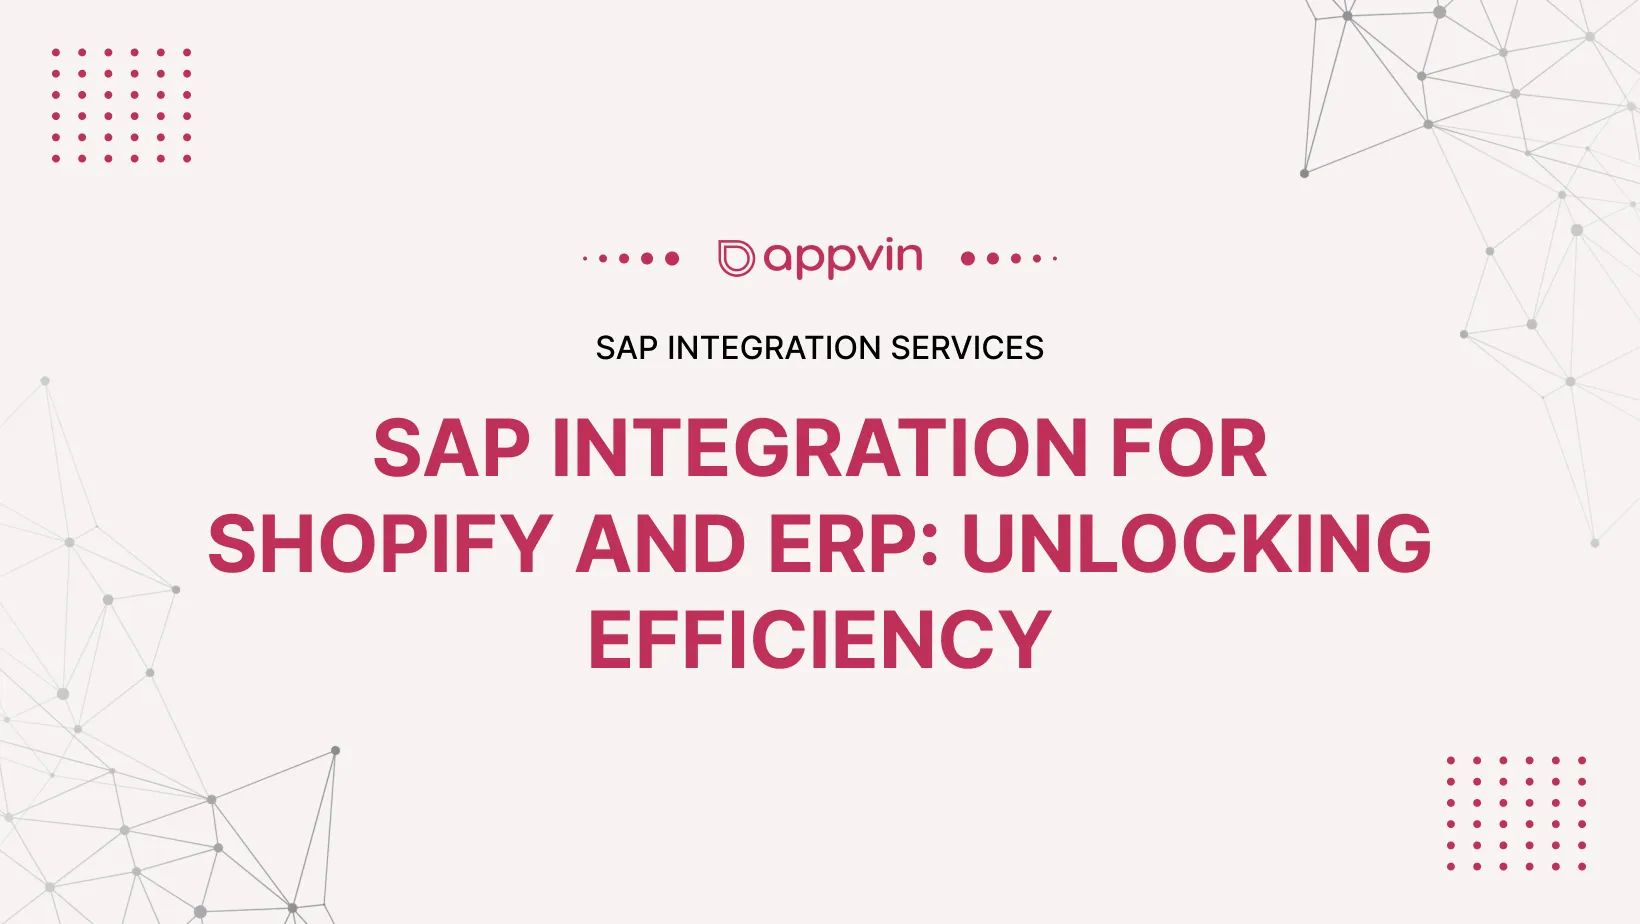 SAP Integration for Shopify and ERP: Unlocking Efficiency